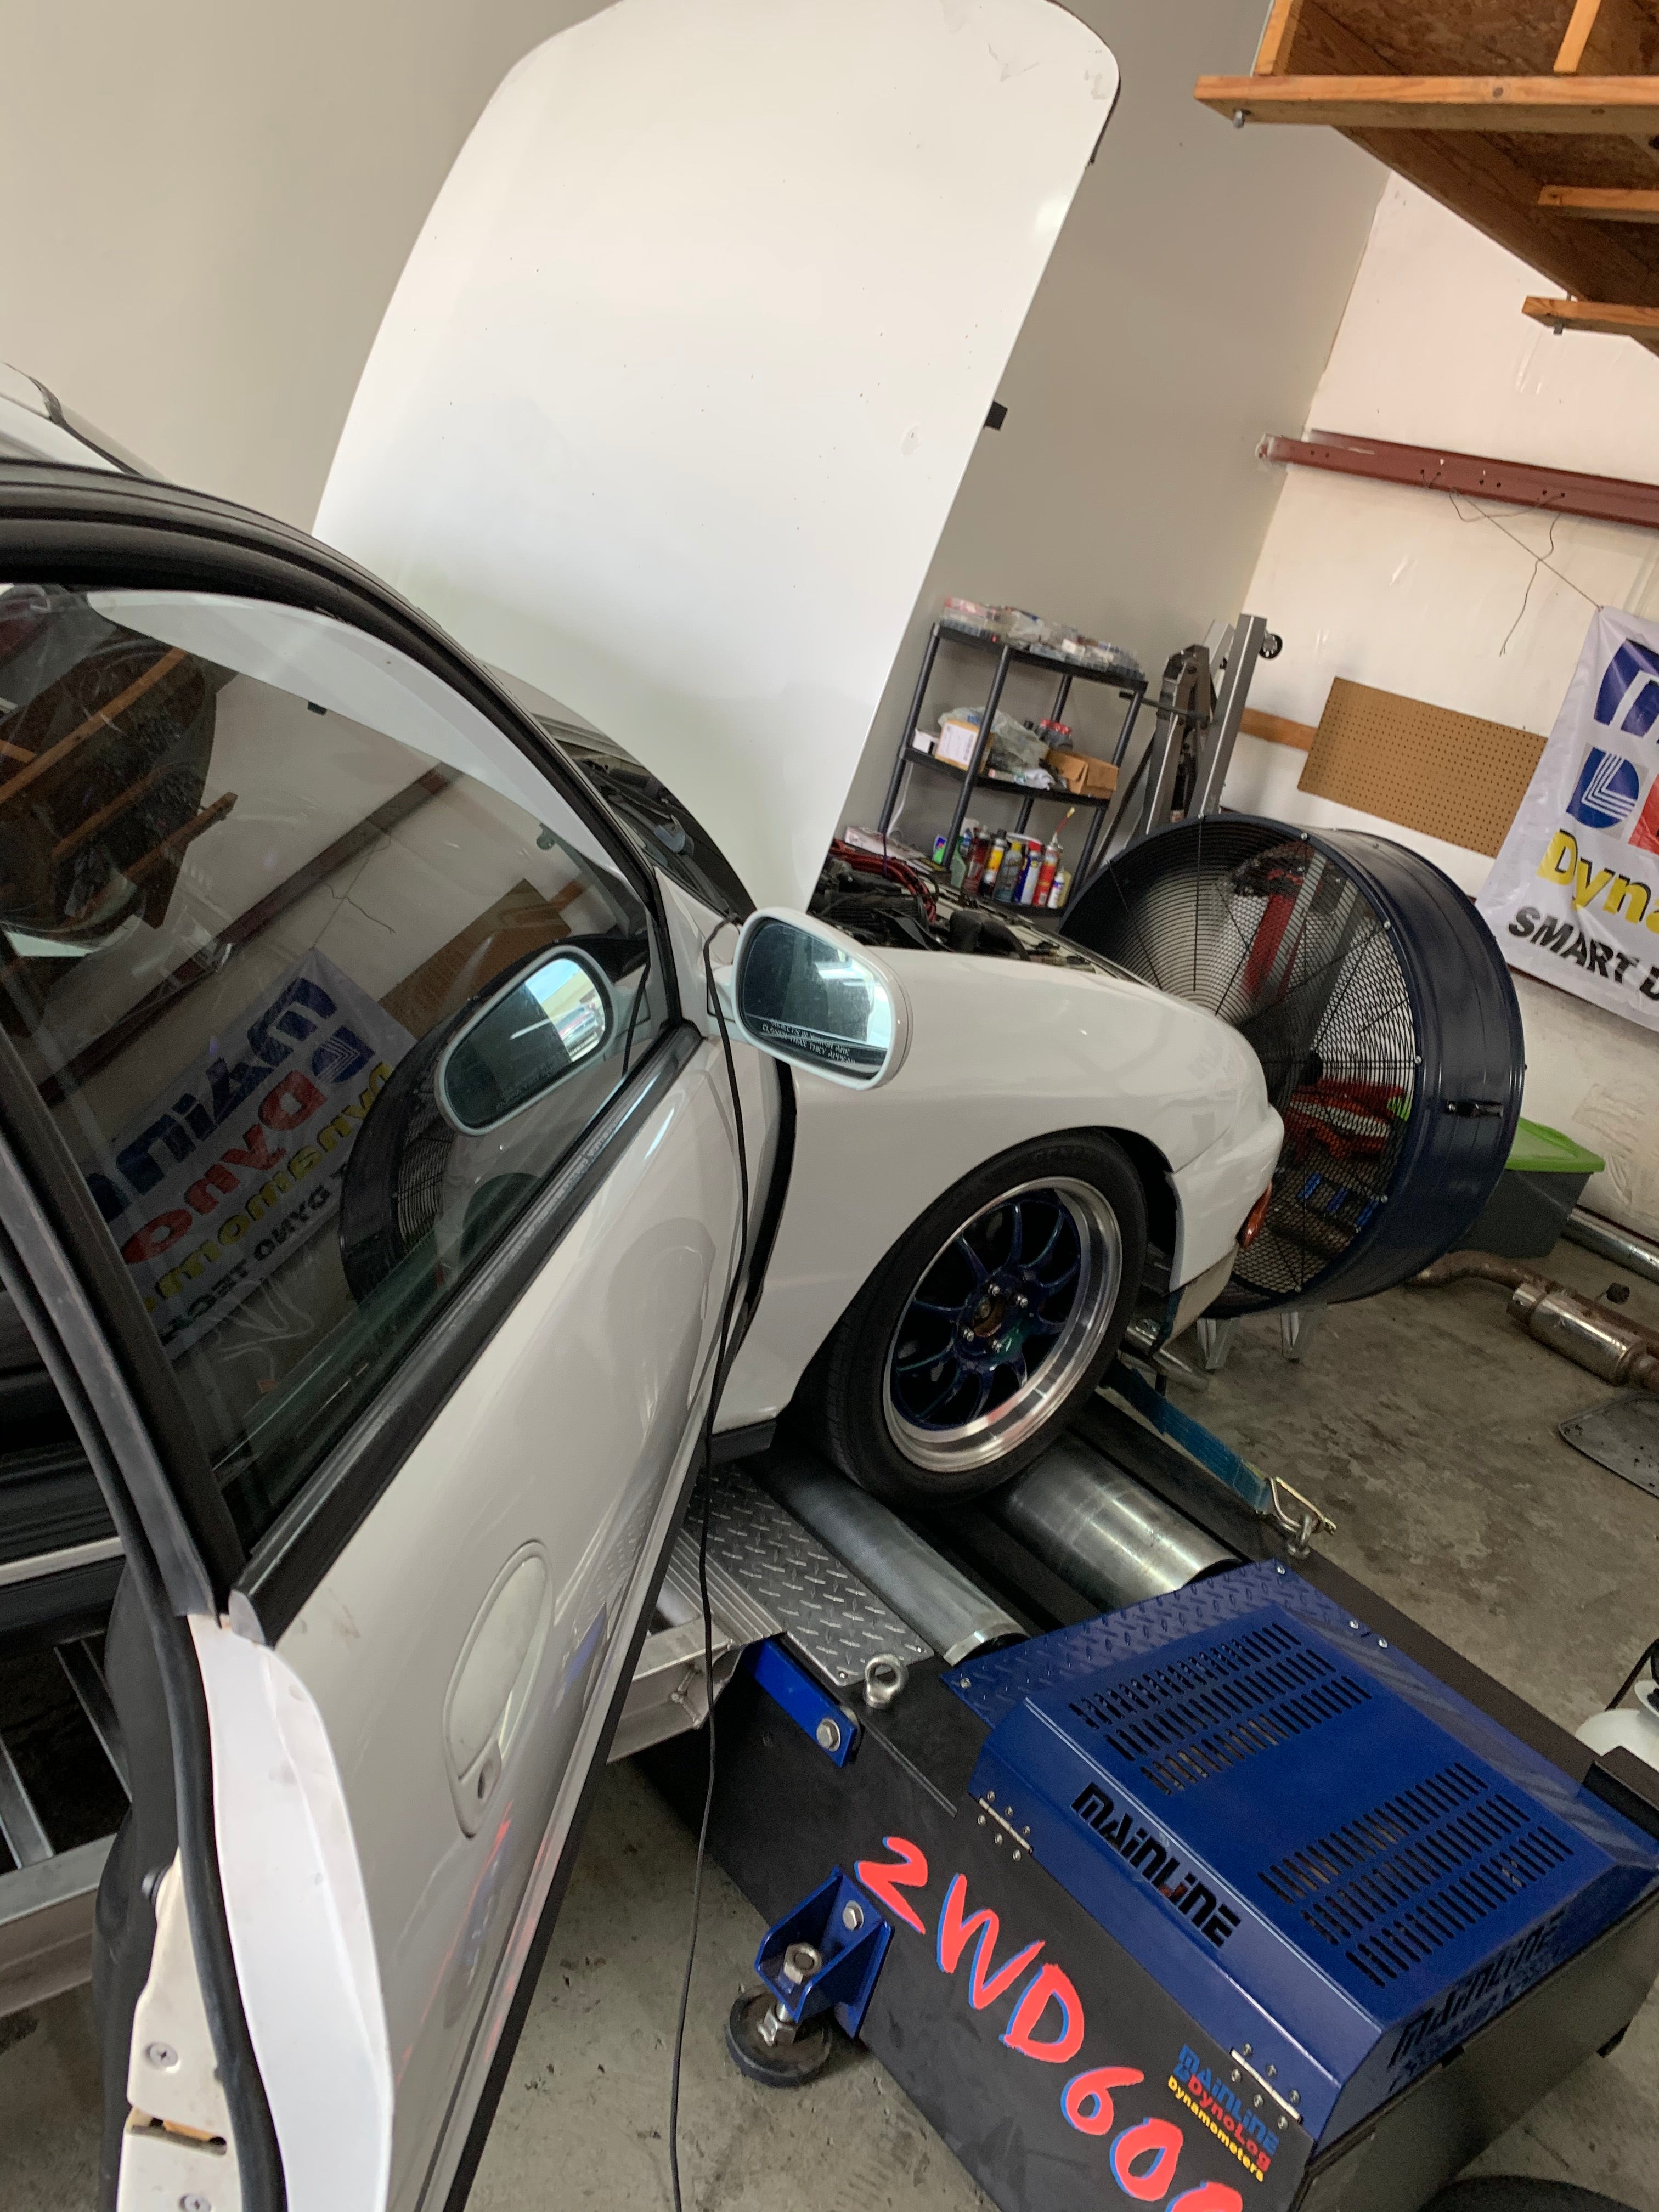 Getting ready your vehicle for a dyno session